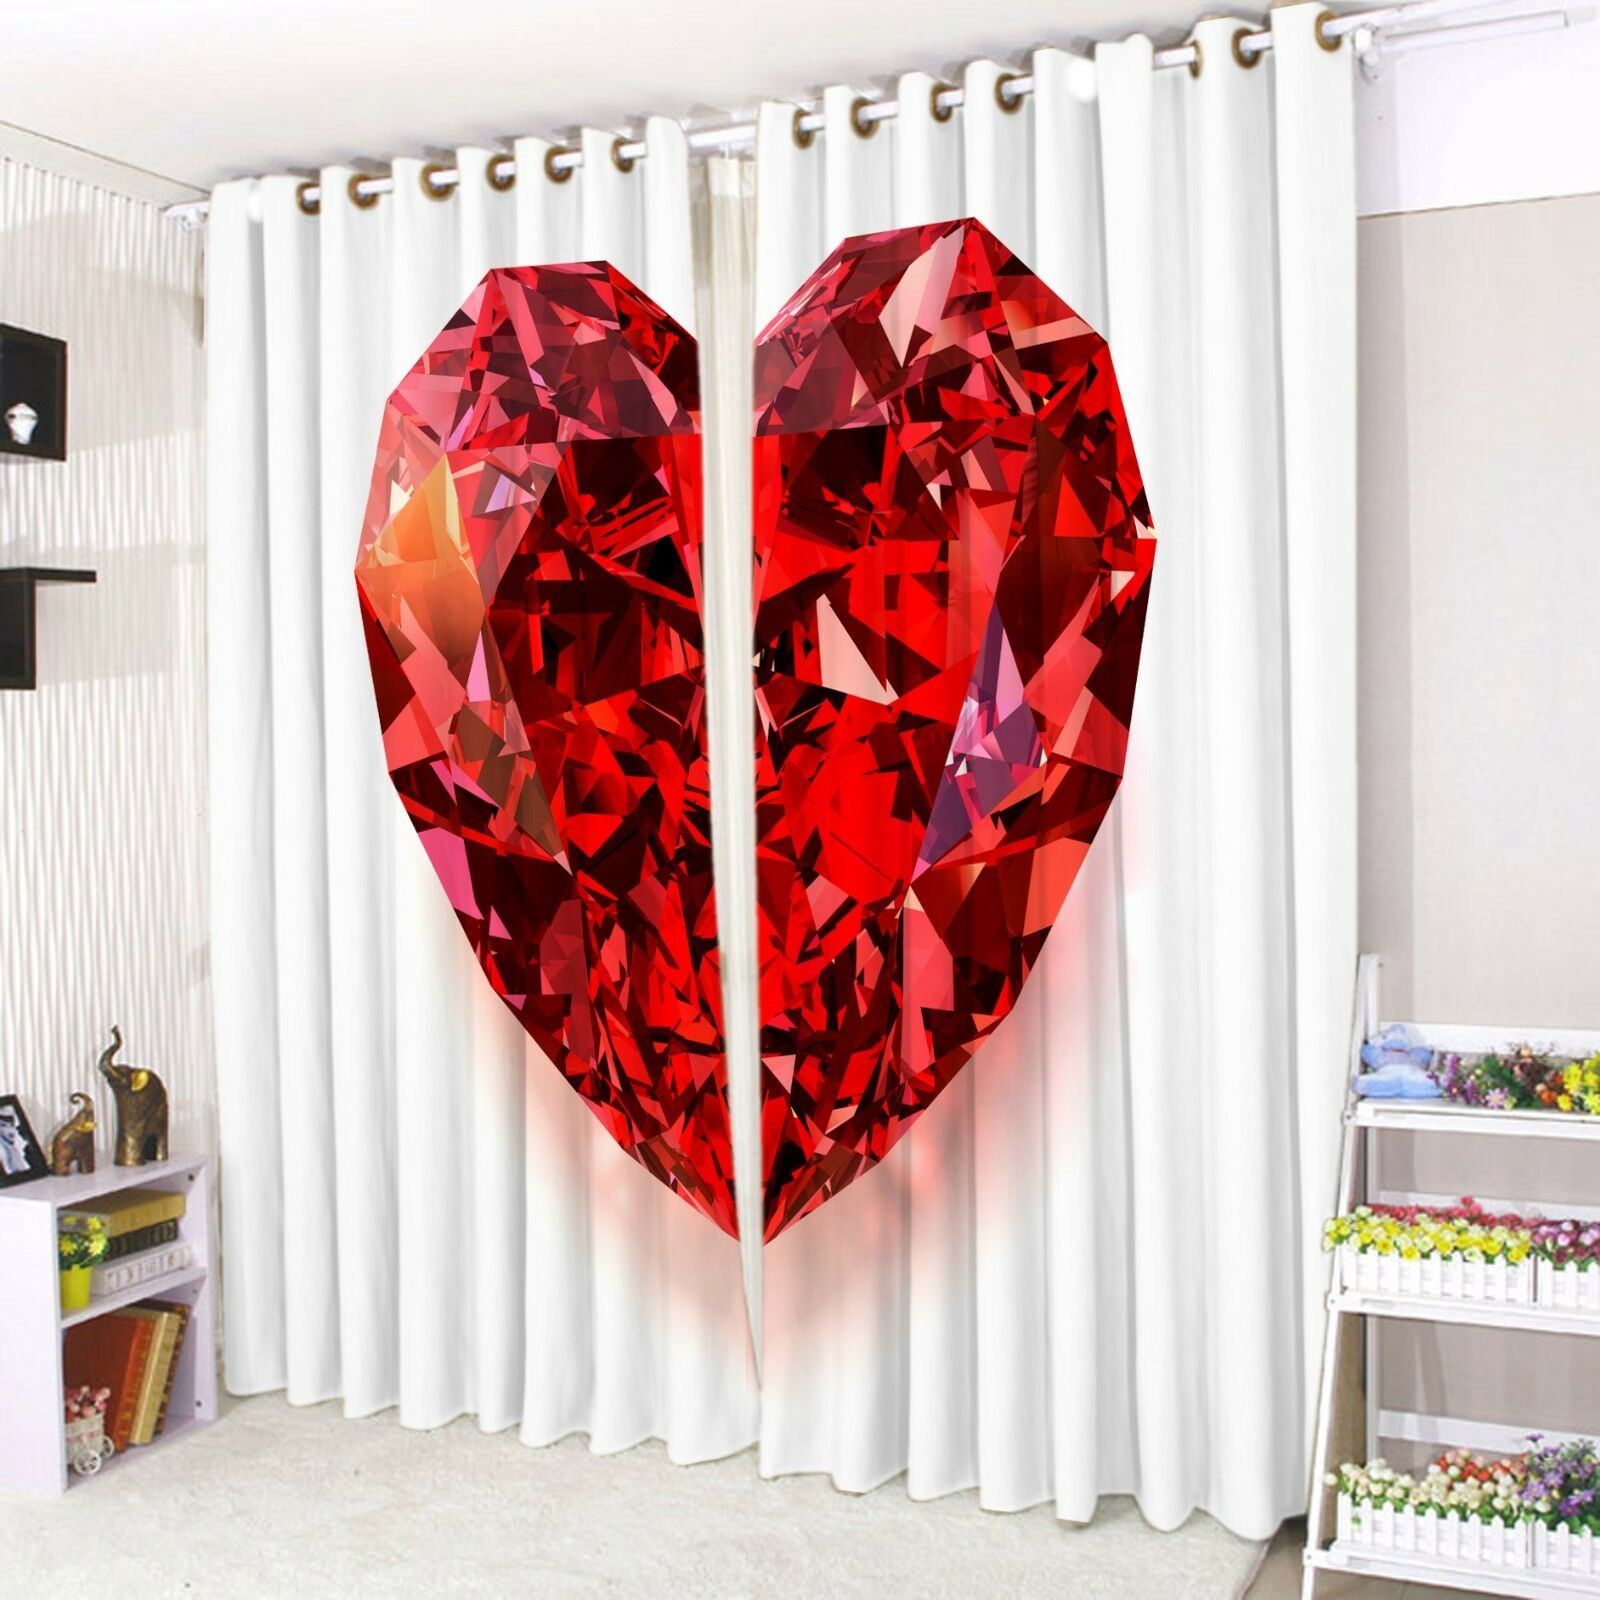 Eyelet Curtains Ring top Pair of 3d Printed Curtains Diamond Heart